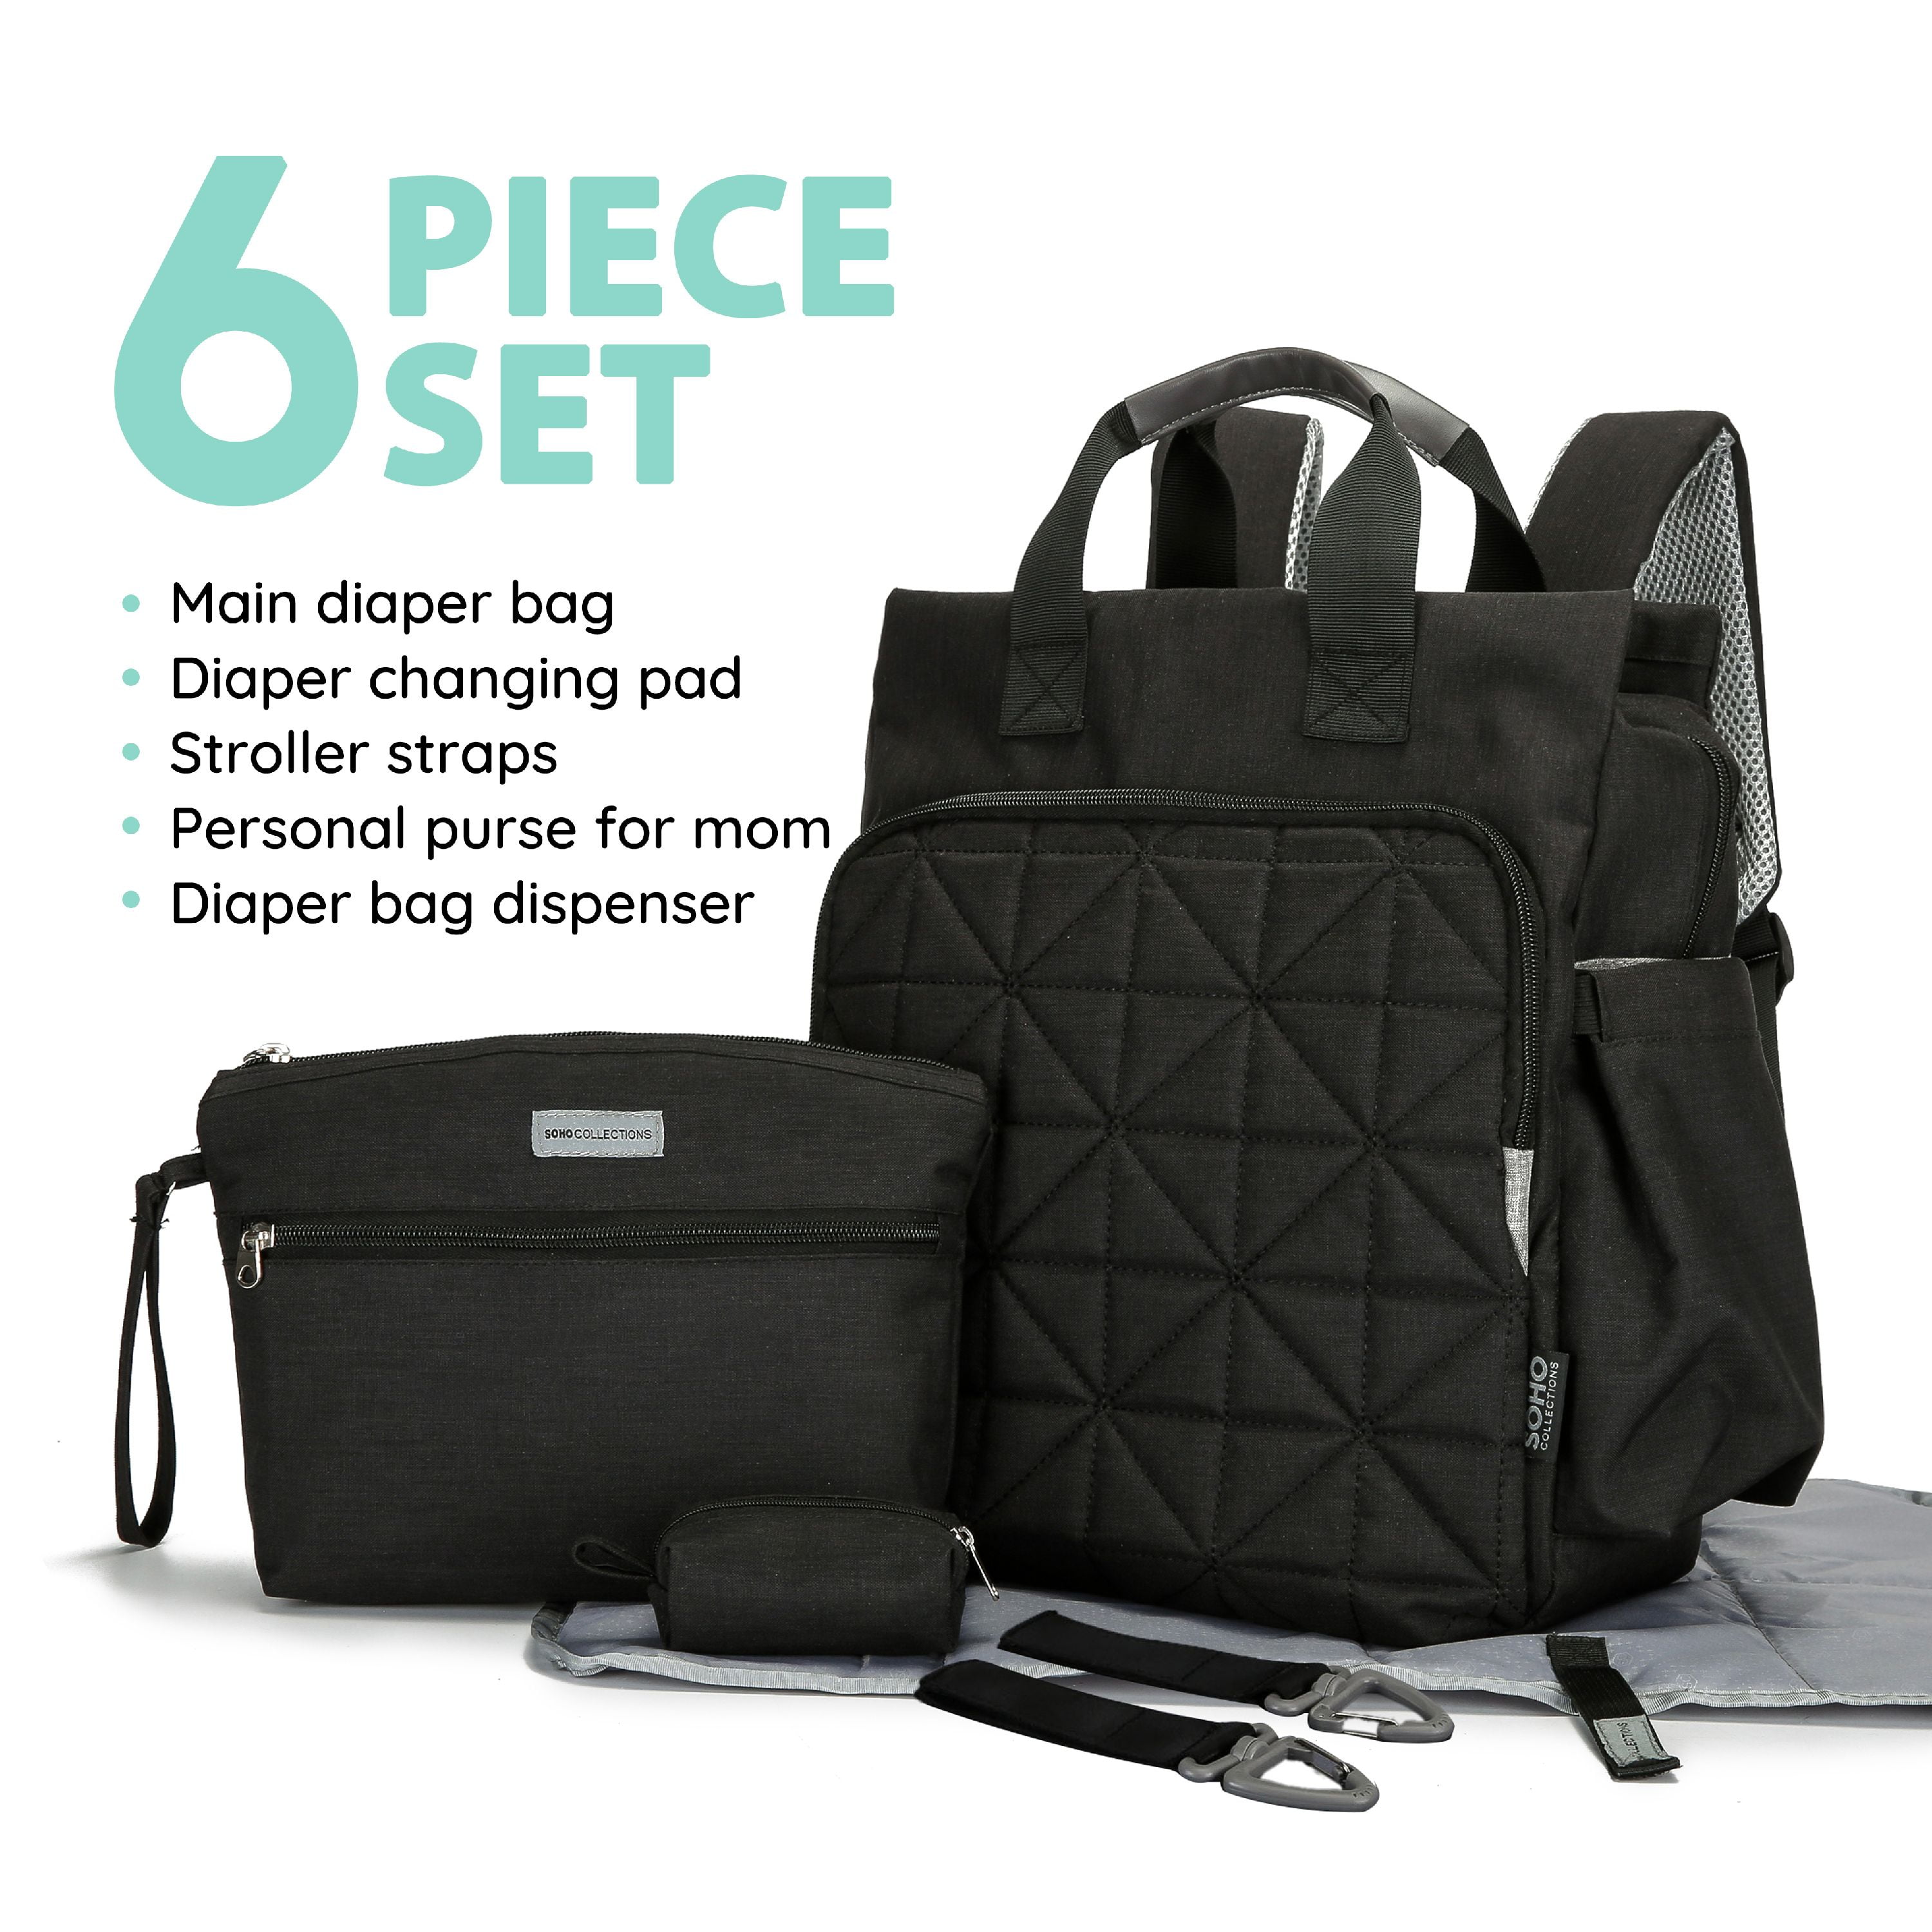 SOHO Pink Diaper bag with changing pad 6 pieces set 